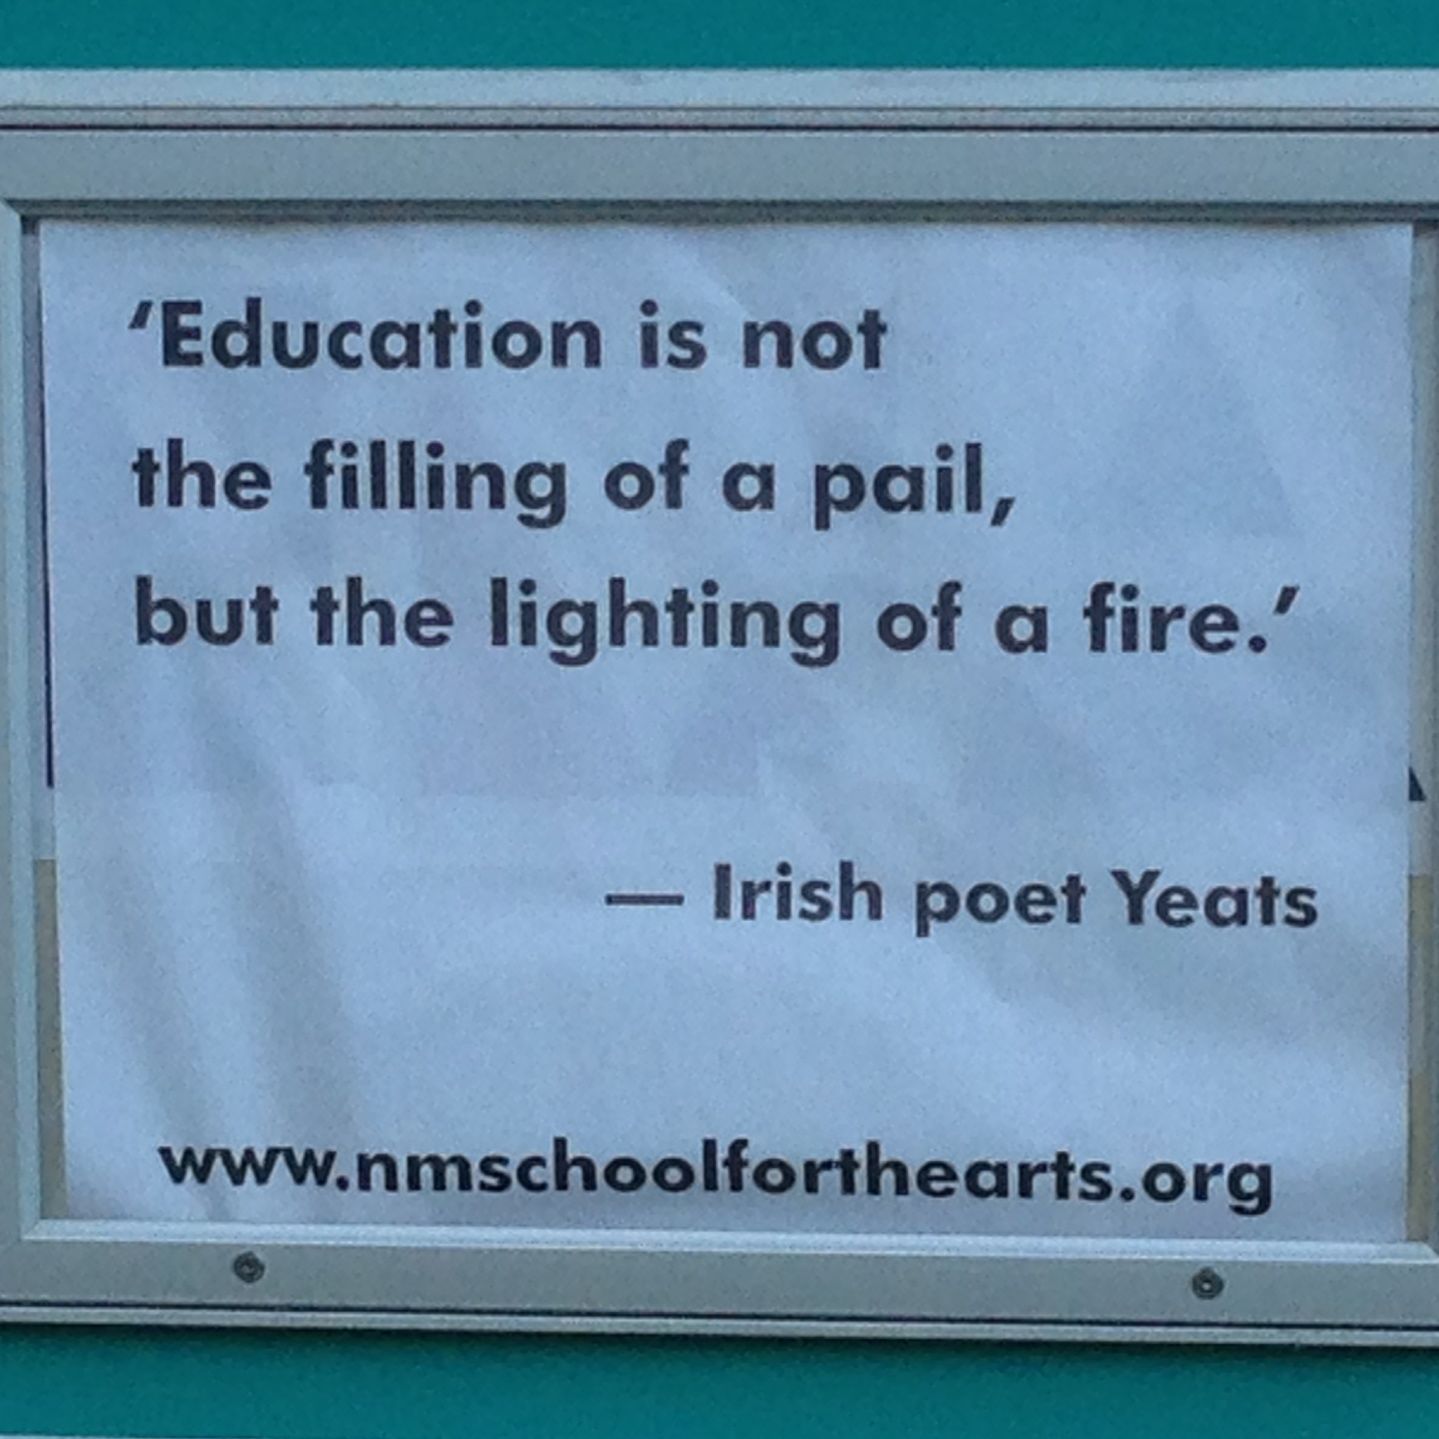 Quotation- black lettering on white background: 'Education is not the filling of a pail, but the lighting of a fire.' -Irish poetYeats www.nmschoolforthe arts.rg